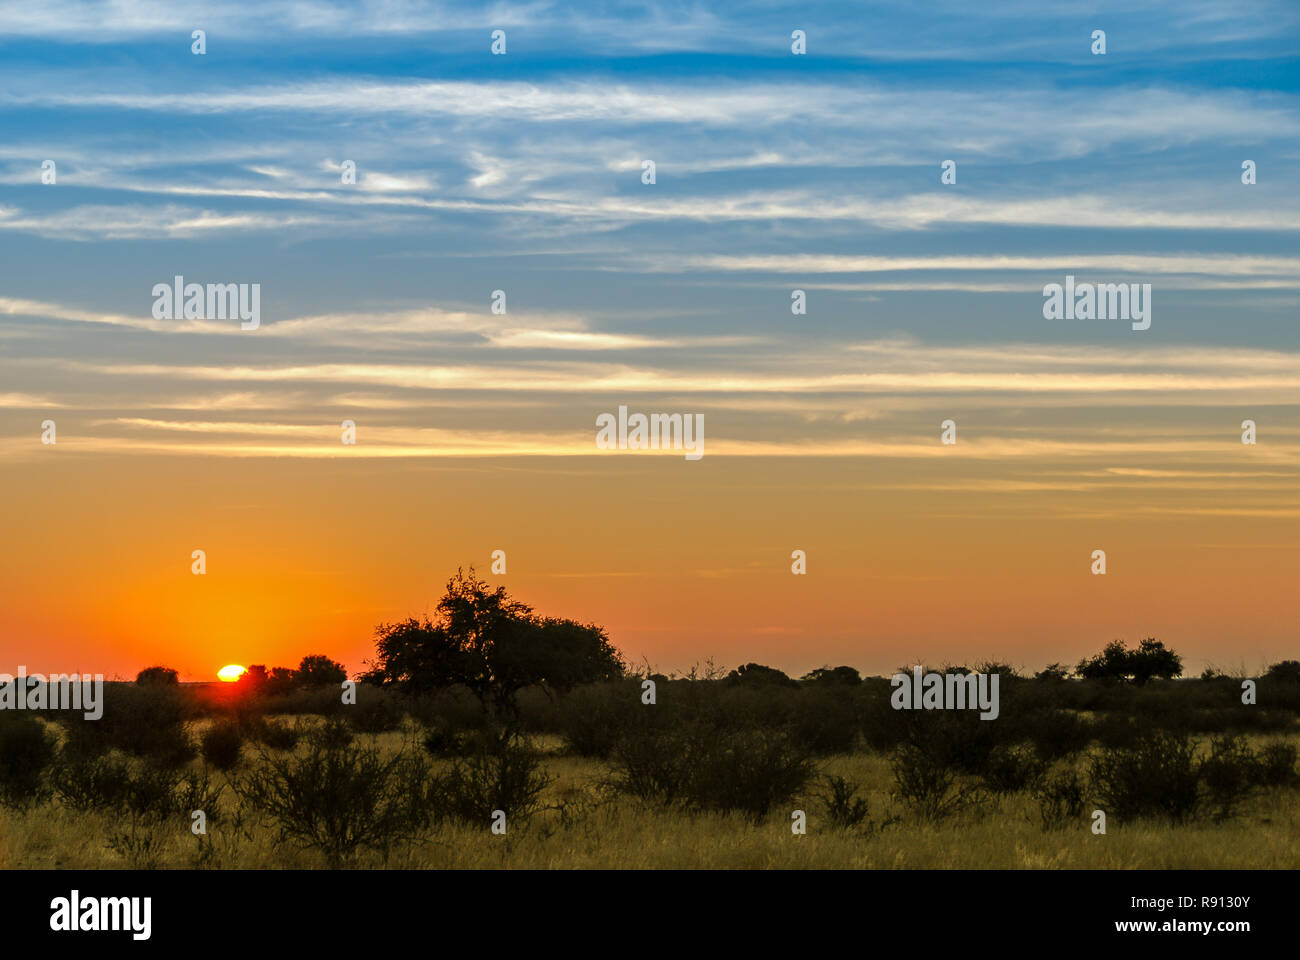 Sunset on the red Kalahari desert with a blue and orange sky in southern Namibia, Africa Stock Photo